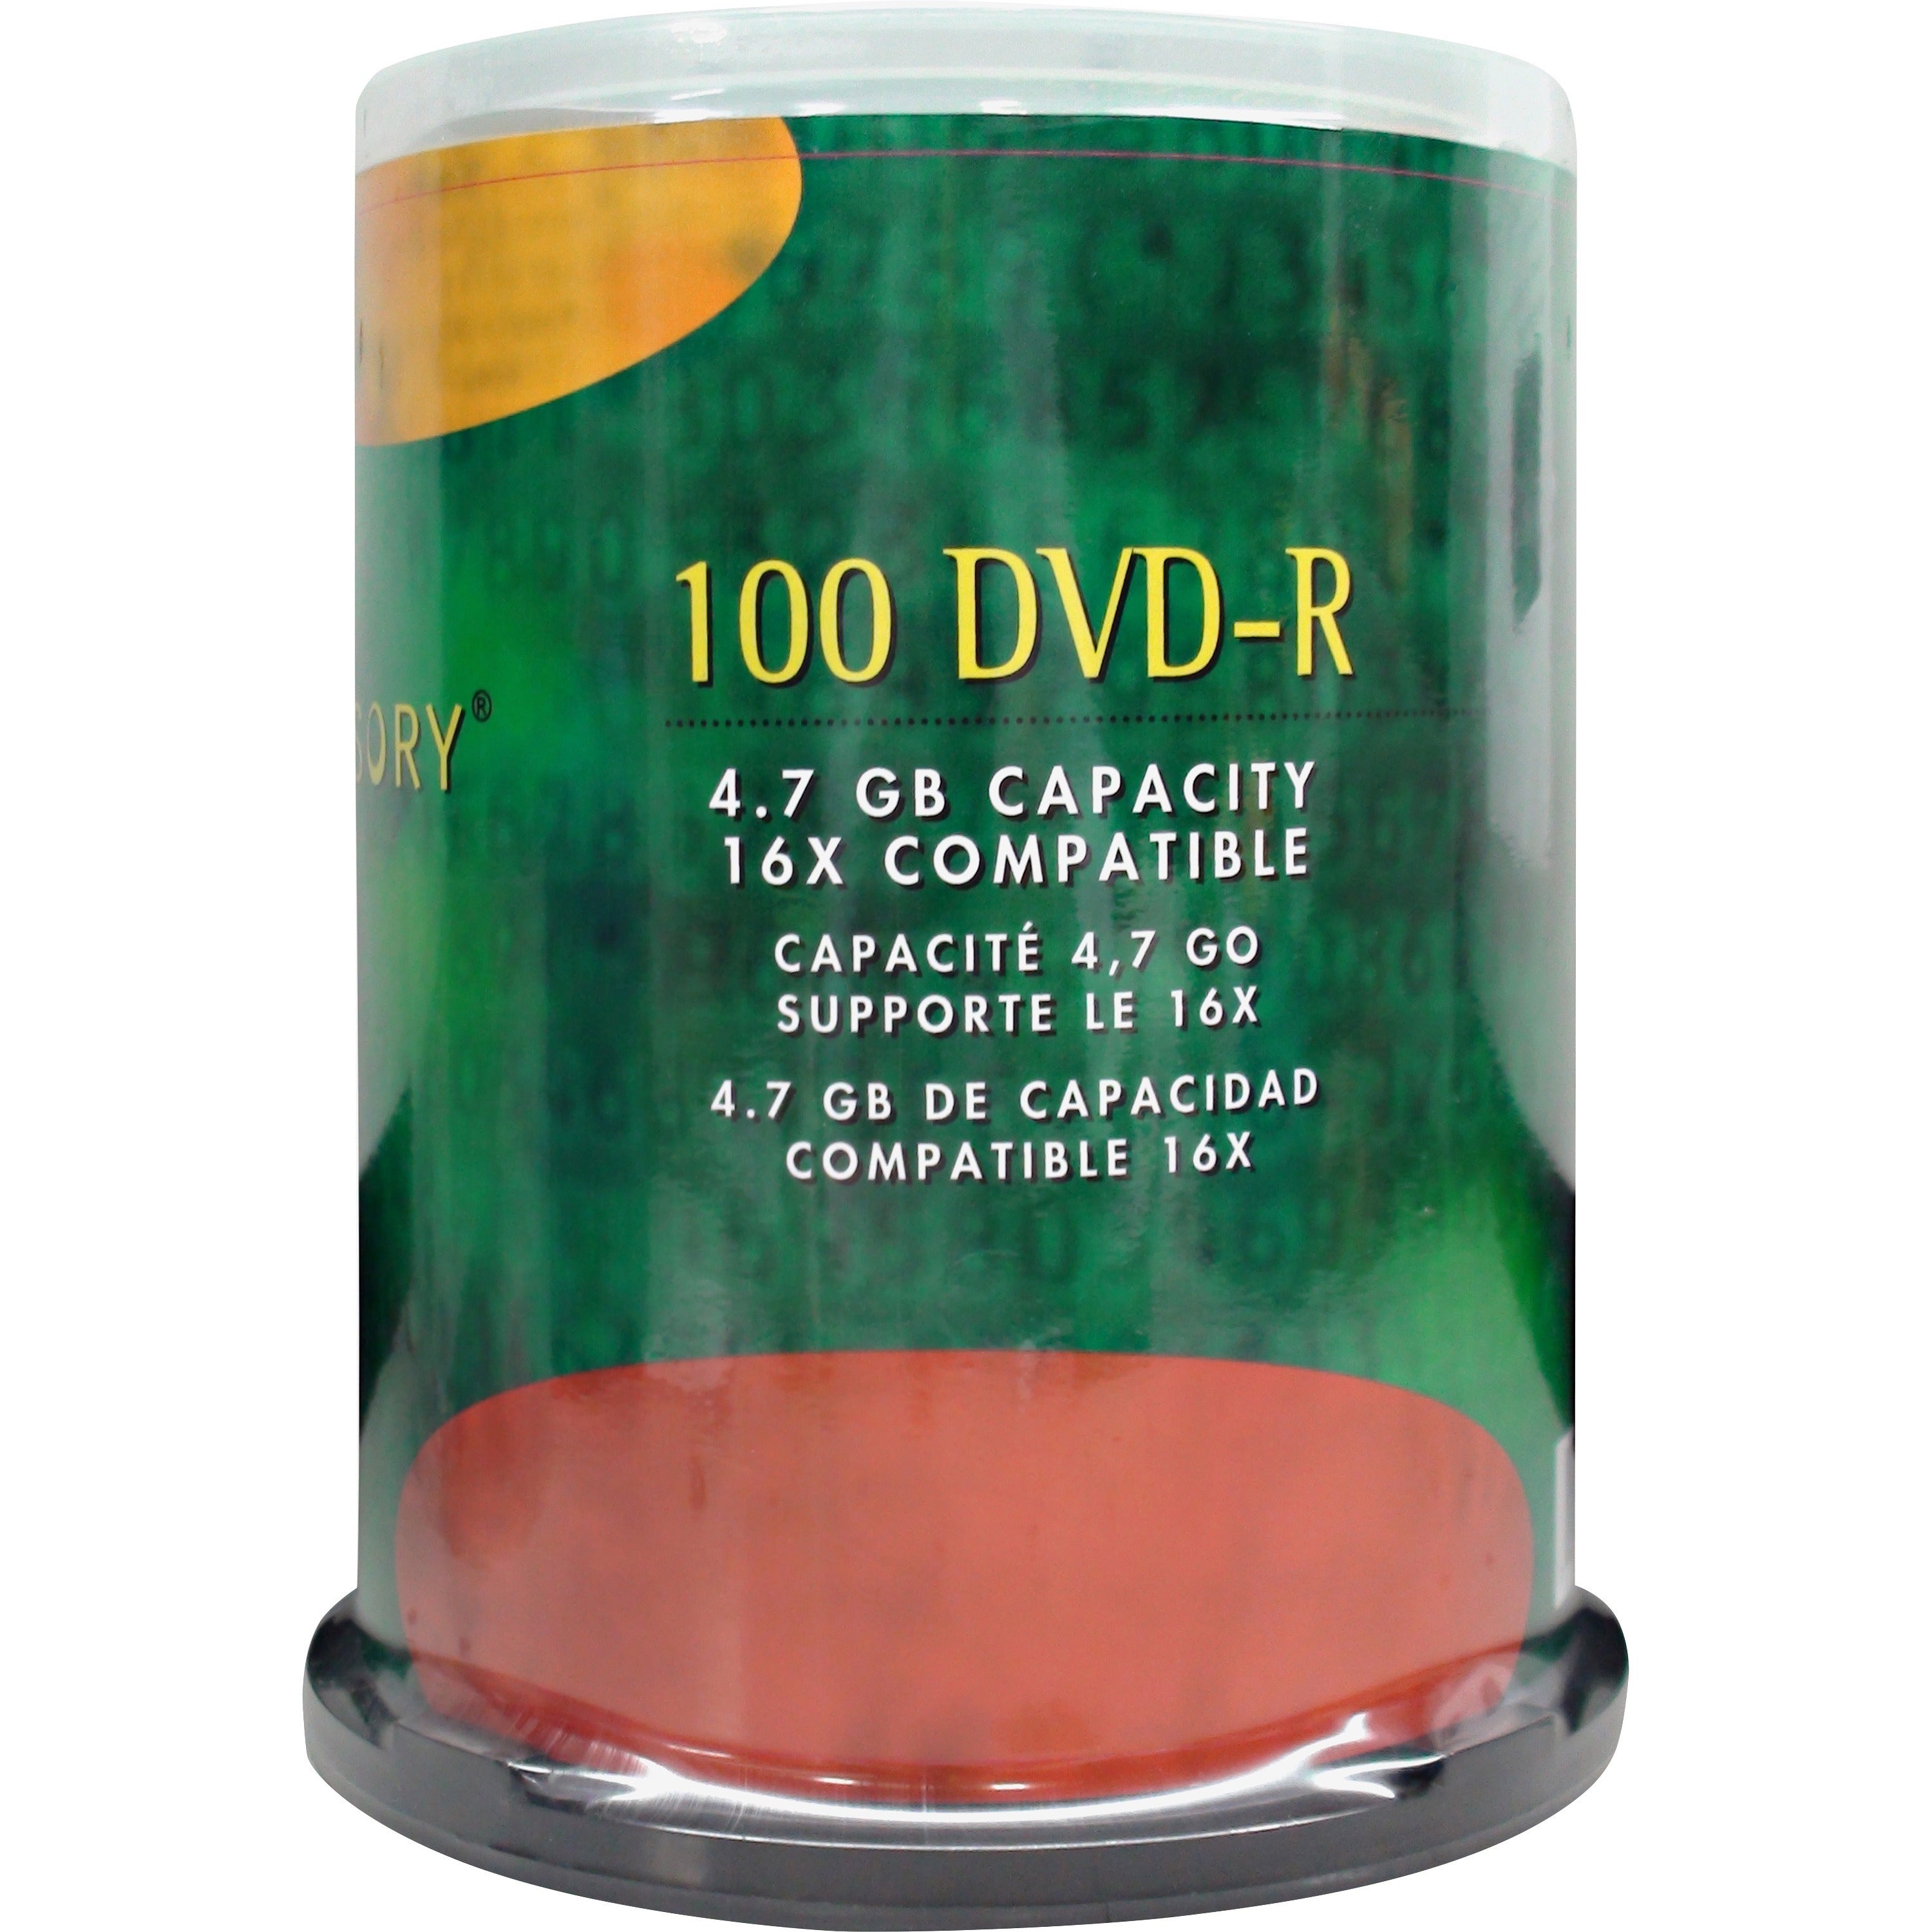 compucessory-dvd-recordable-media-dvd-r-16x-470-gb-100-pack-120mm-2-hour-maximum-recording-time_ccs72103 - 1